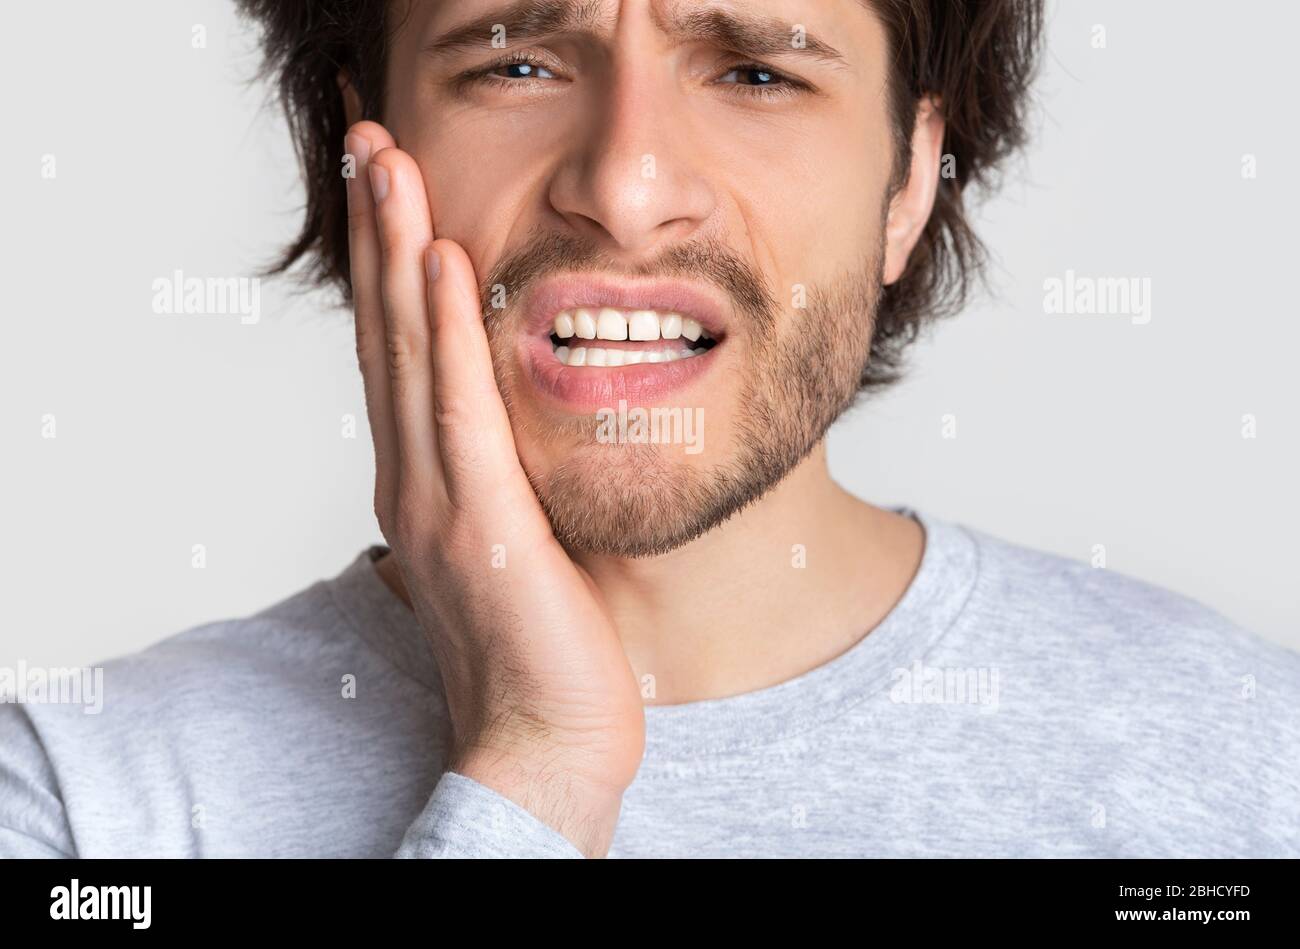 Dental health and care concept. Man feeling painful Stock Photo